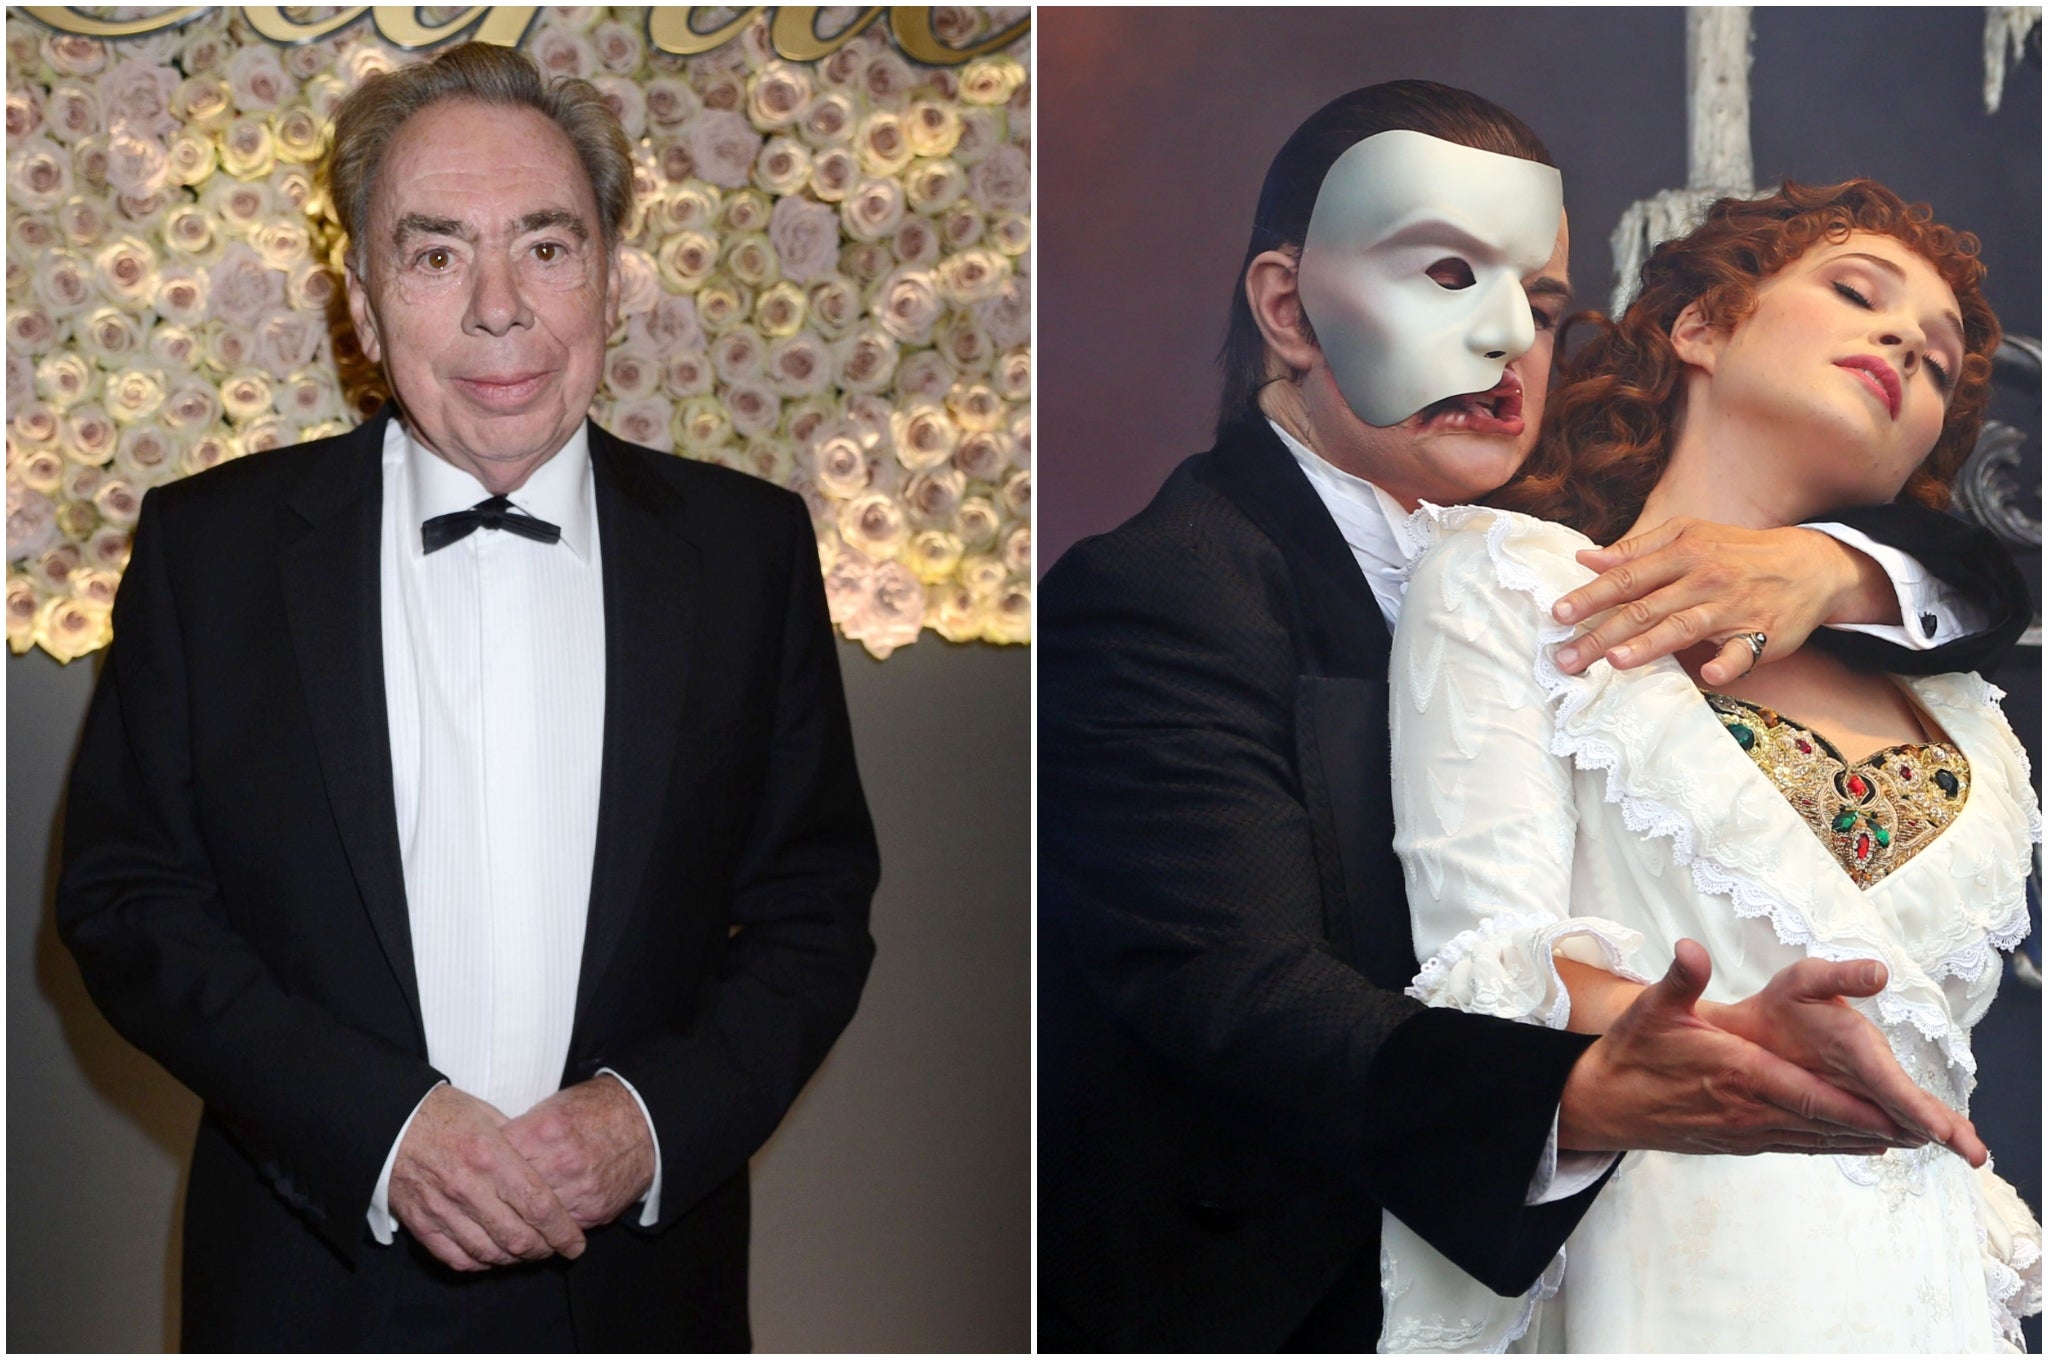 Andrew Lloyd Webber wants theatres to reopen